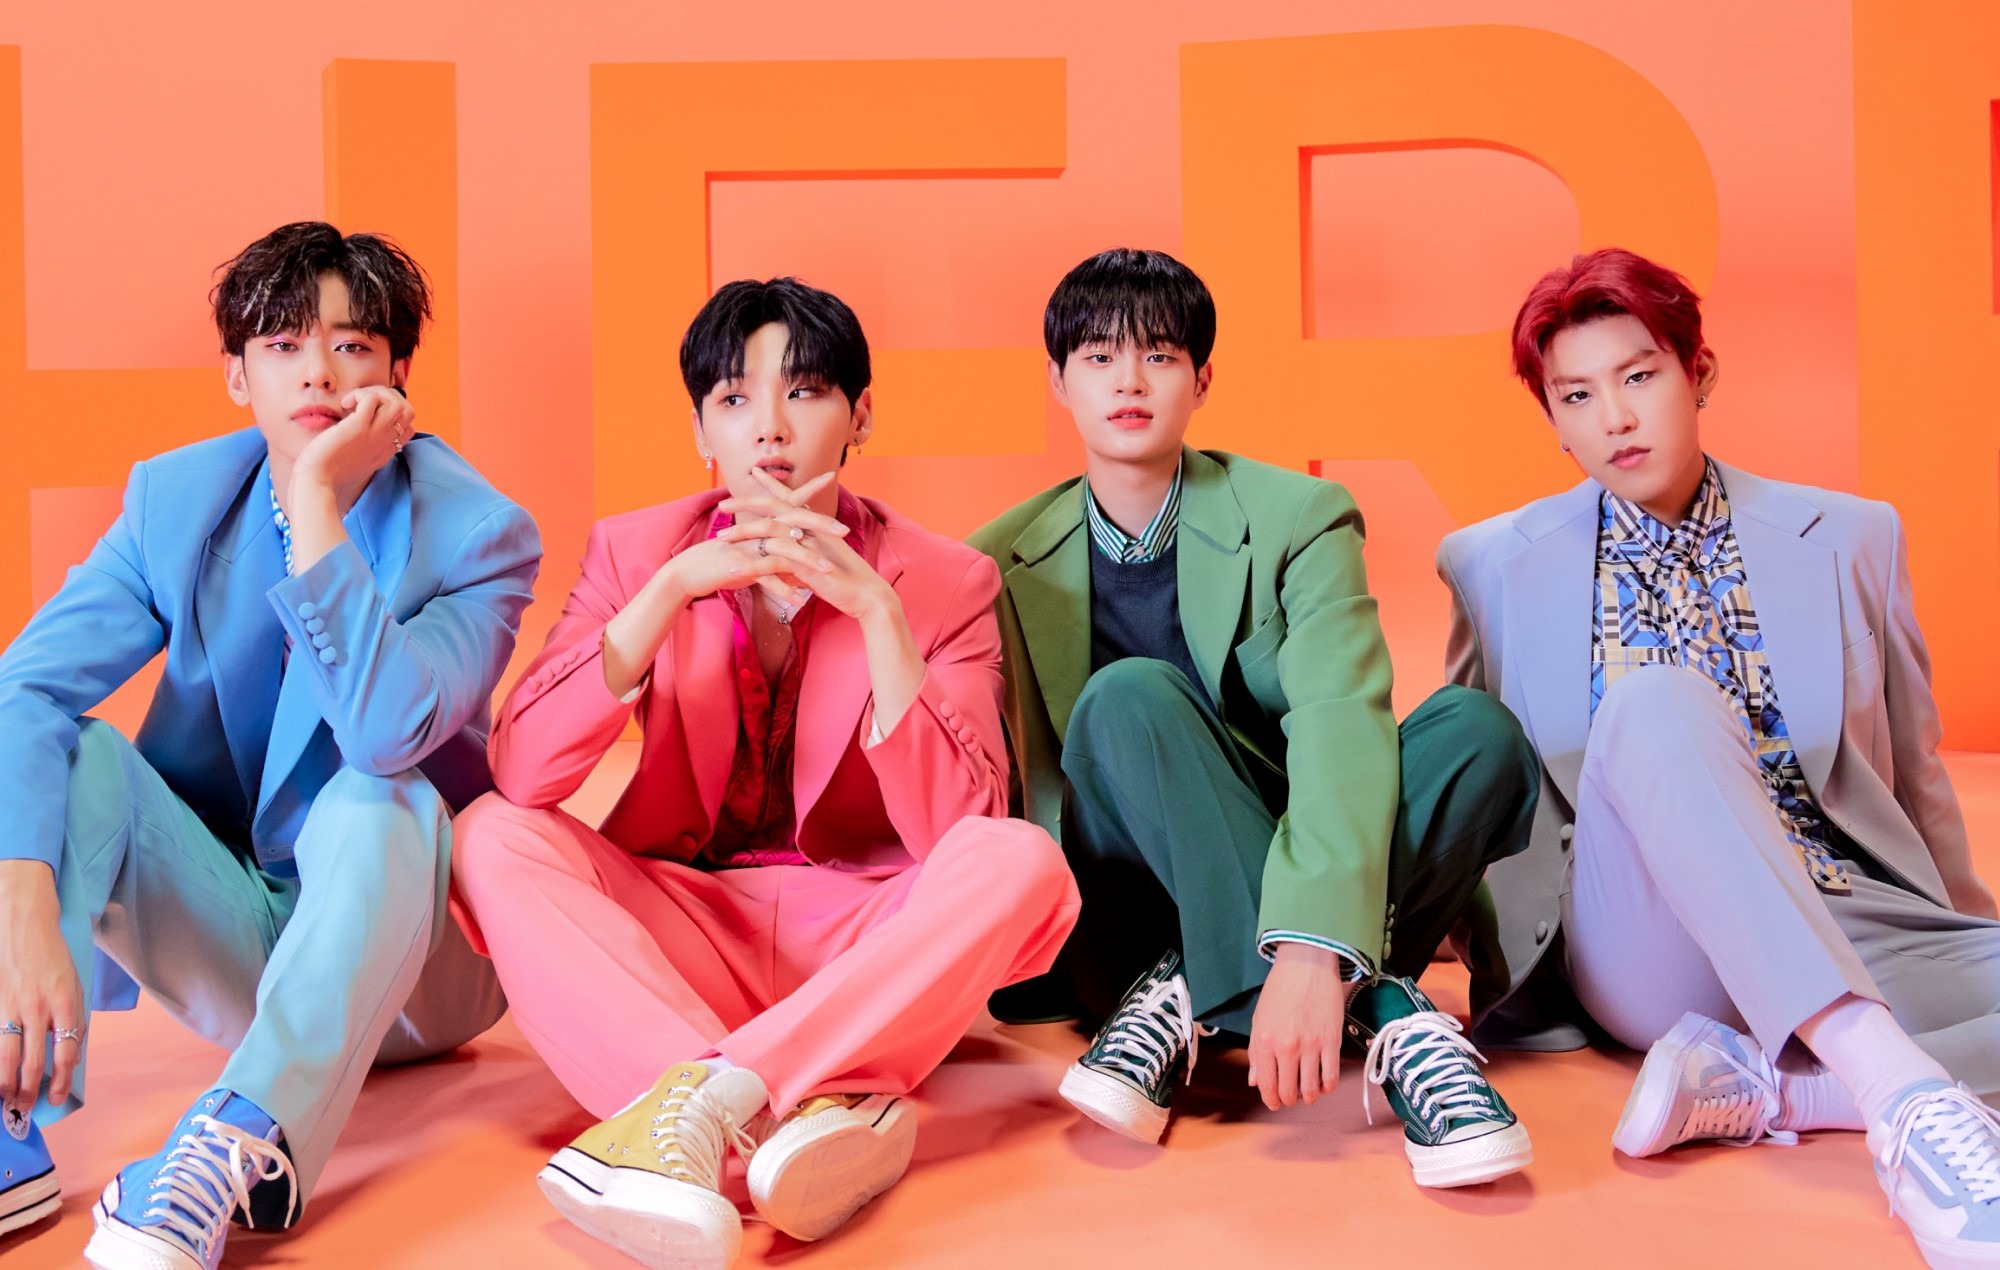 AB6IX on how “love stories” from American high school dramas inspired new single ‘Cherry’